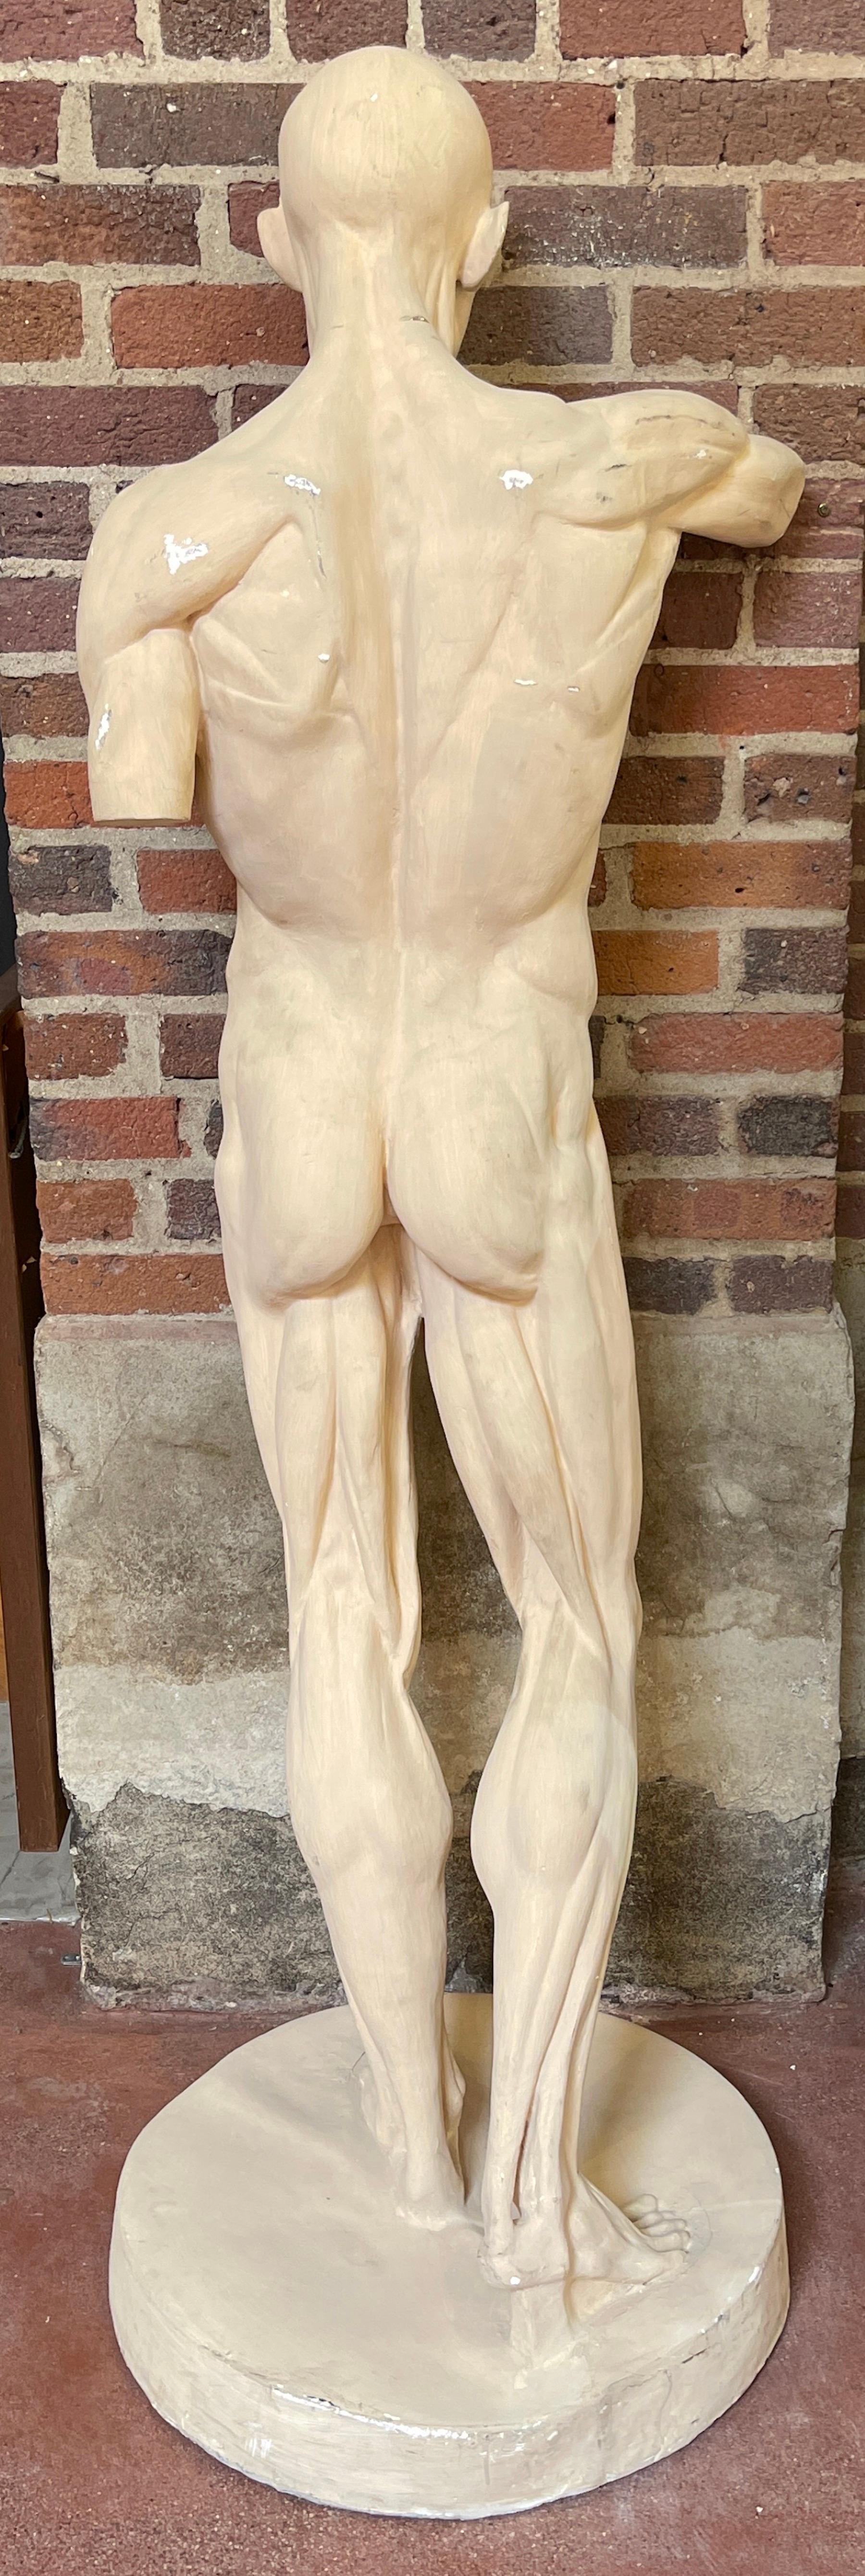 20th Century Life Size Anatomical Study of Flayed Male L'ecorche after Jean-Antoine Houdon